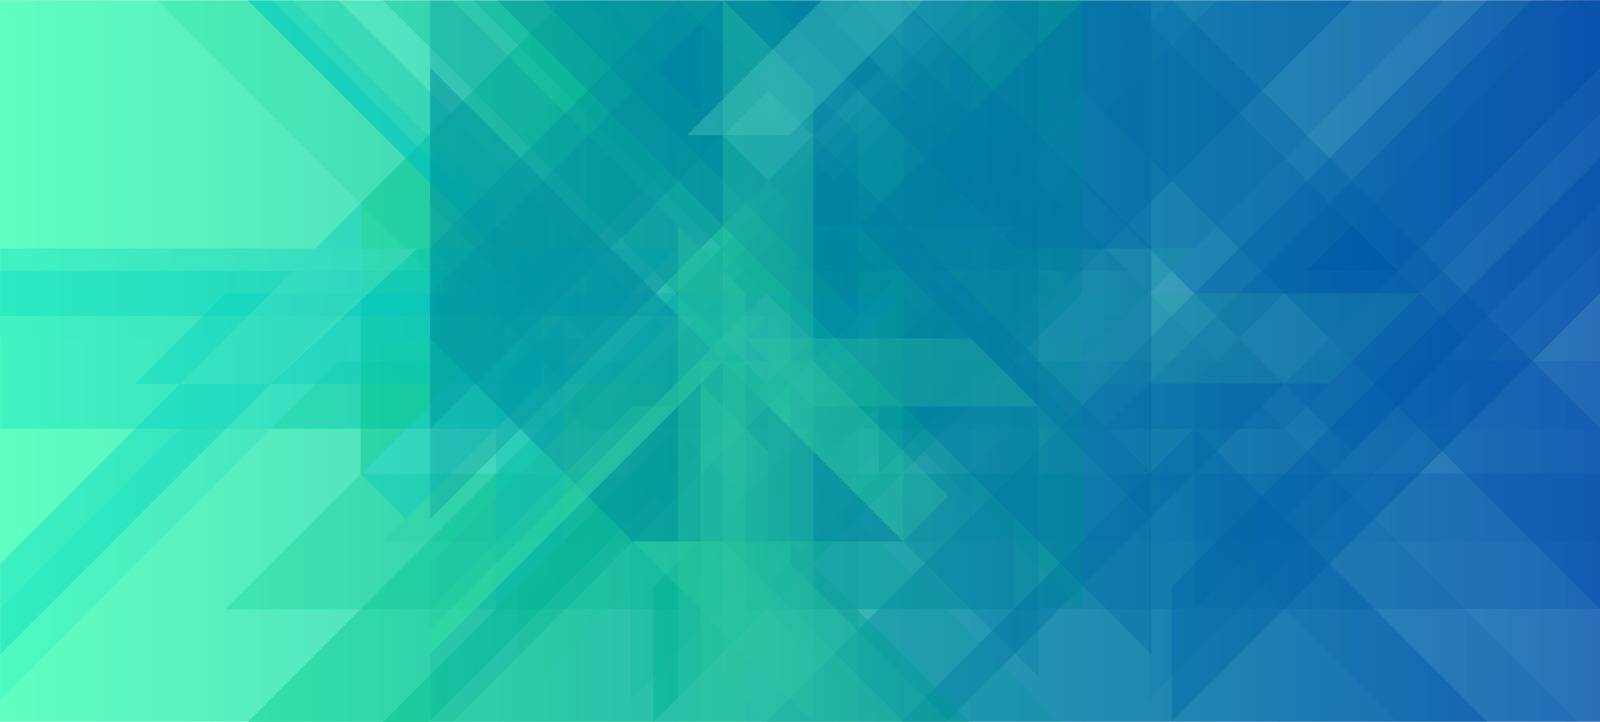 Abstract geometric vector banner with triangular pattern